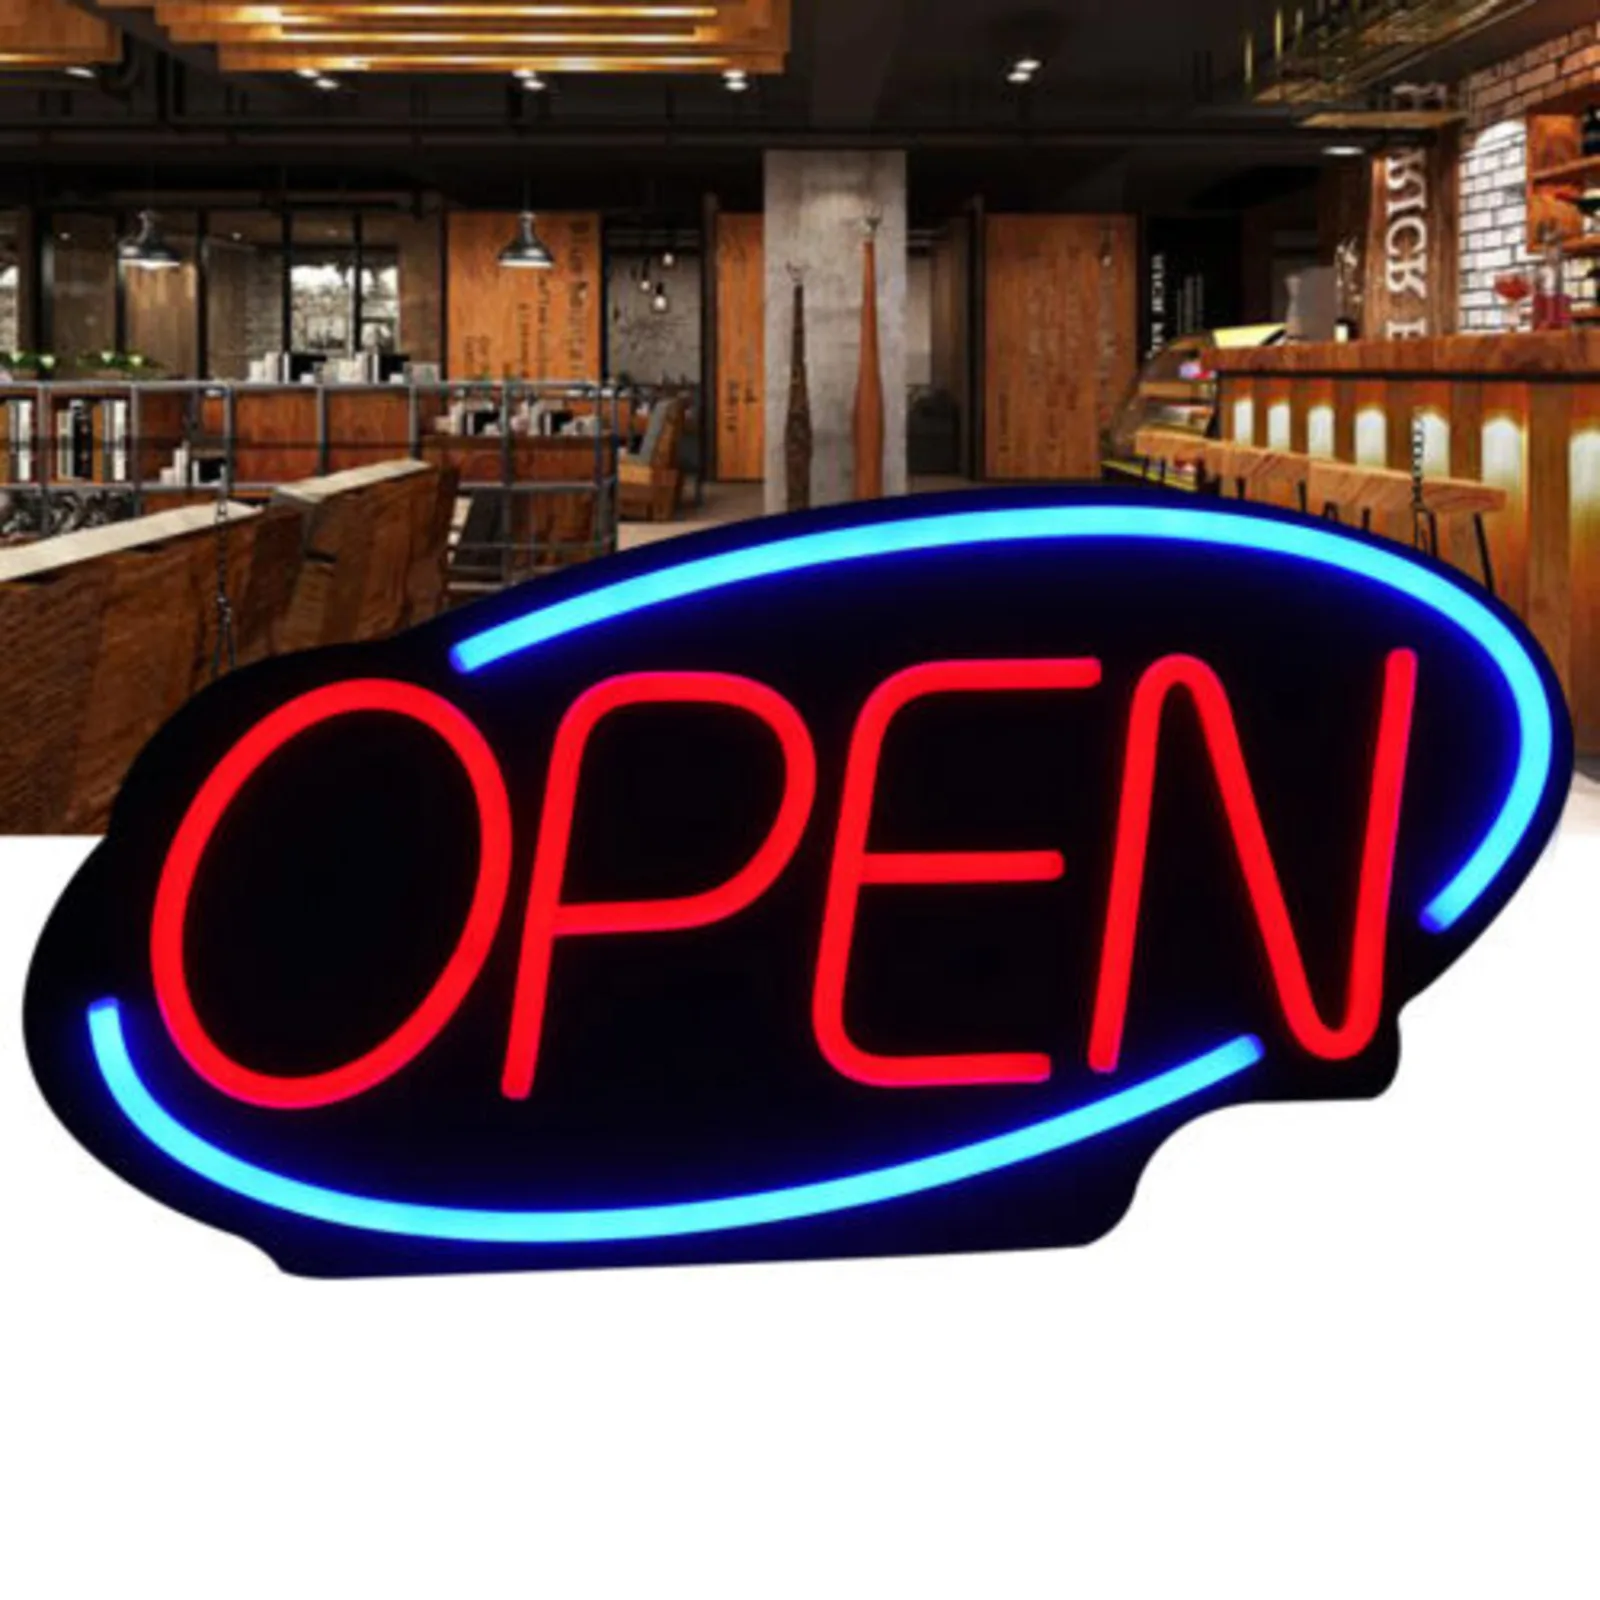 open-sign-large-led-sign-neon-bright-light-for-outside-wall-decor-bar-pub-restaurant